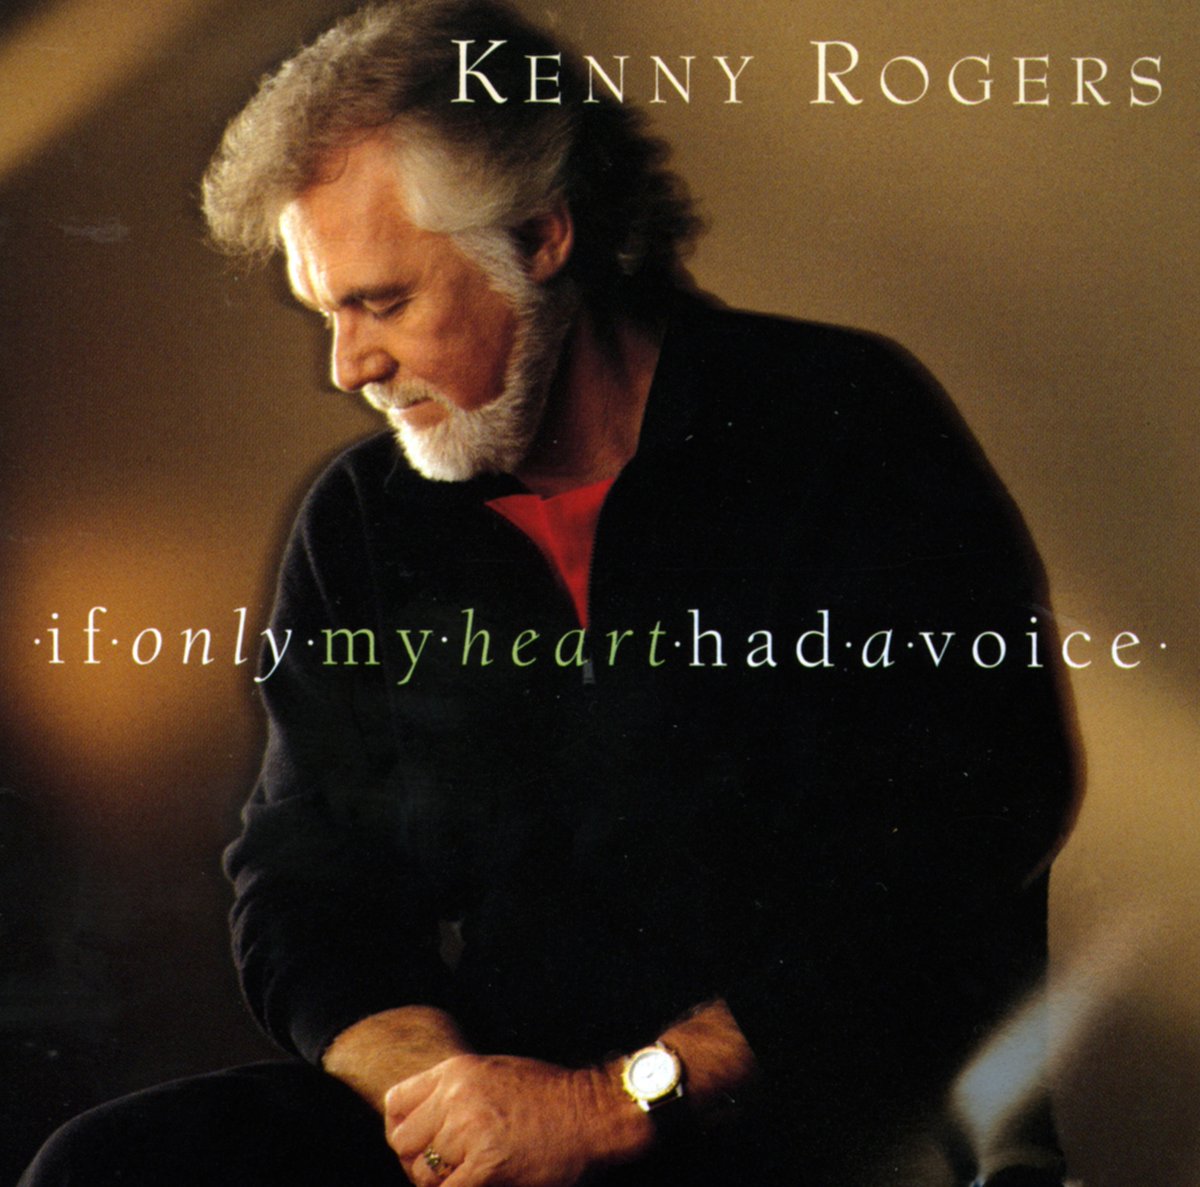 This week in 1993, Kenny Rogers released the album IF ONLY MY HEART HAD A VOICE featuring 'Ol' Red,' with production by Kenny's first solo producer—the late, great Larry Butler—and James Stroud. Who has this album and what's your favorite track from it? #FlashbackFriday -Team KR